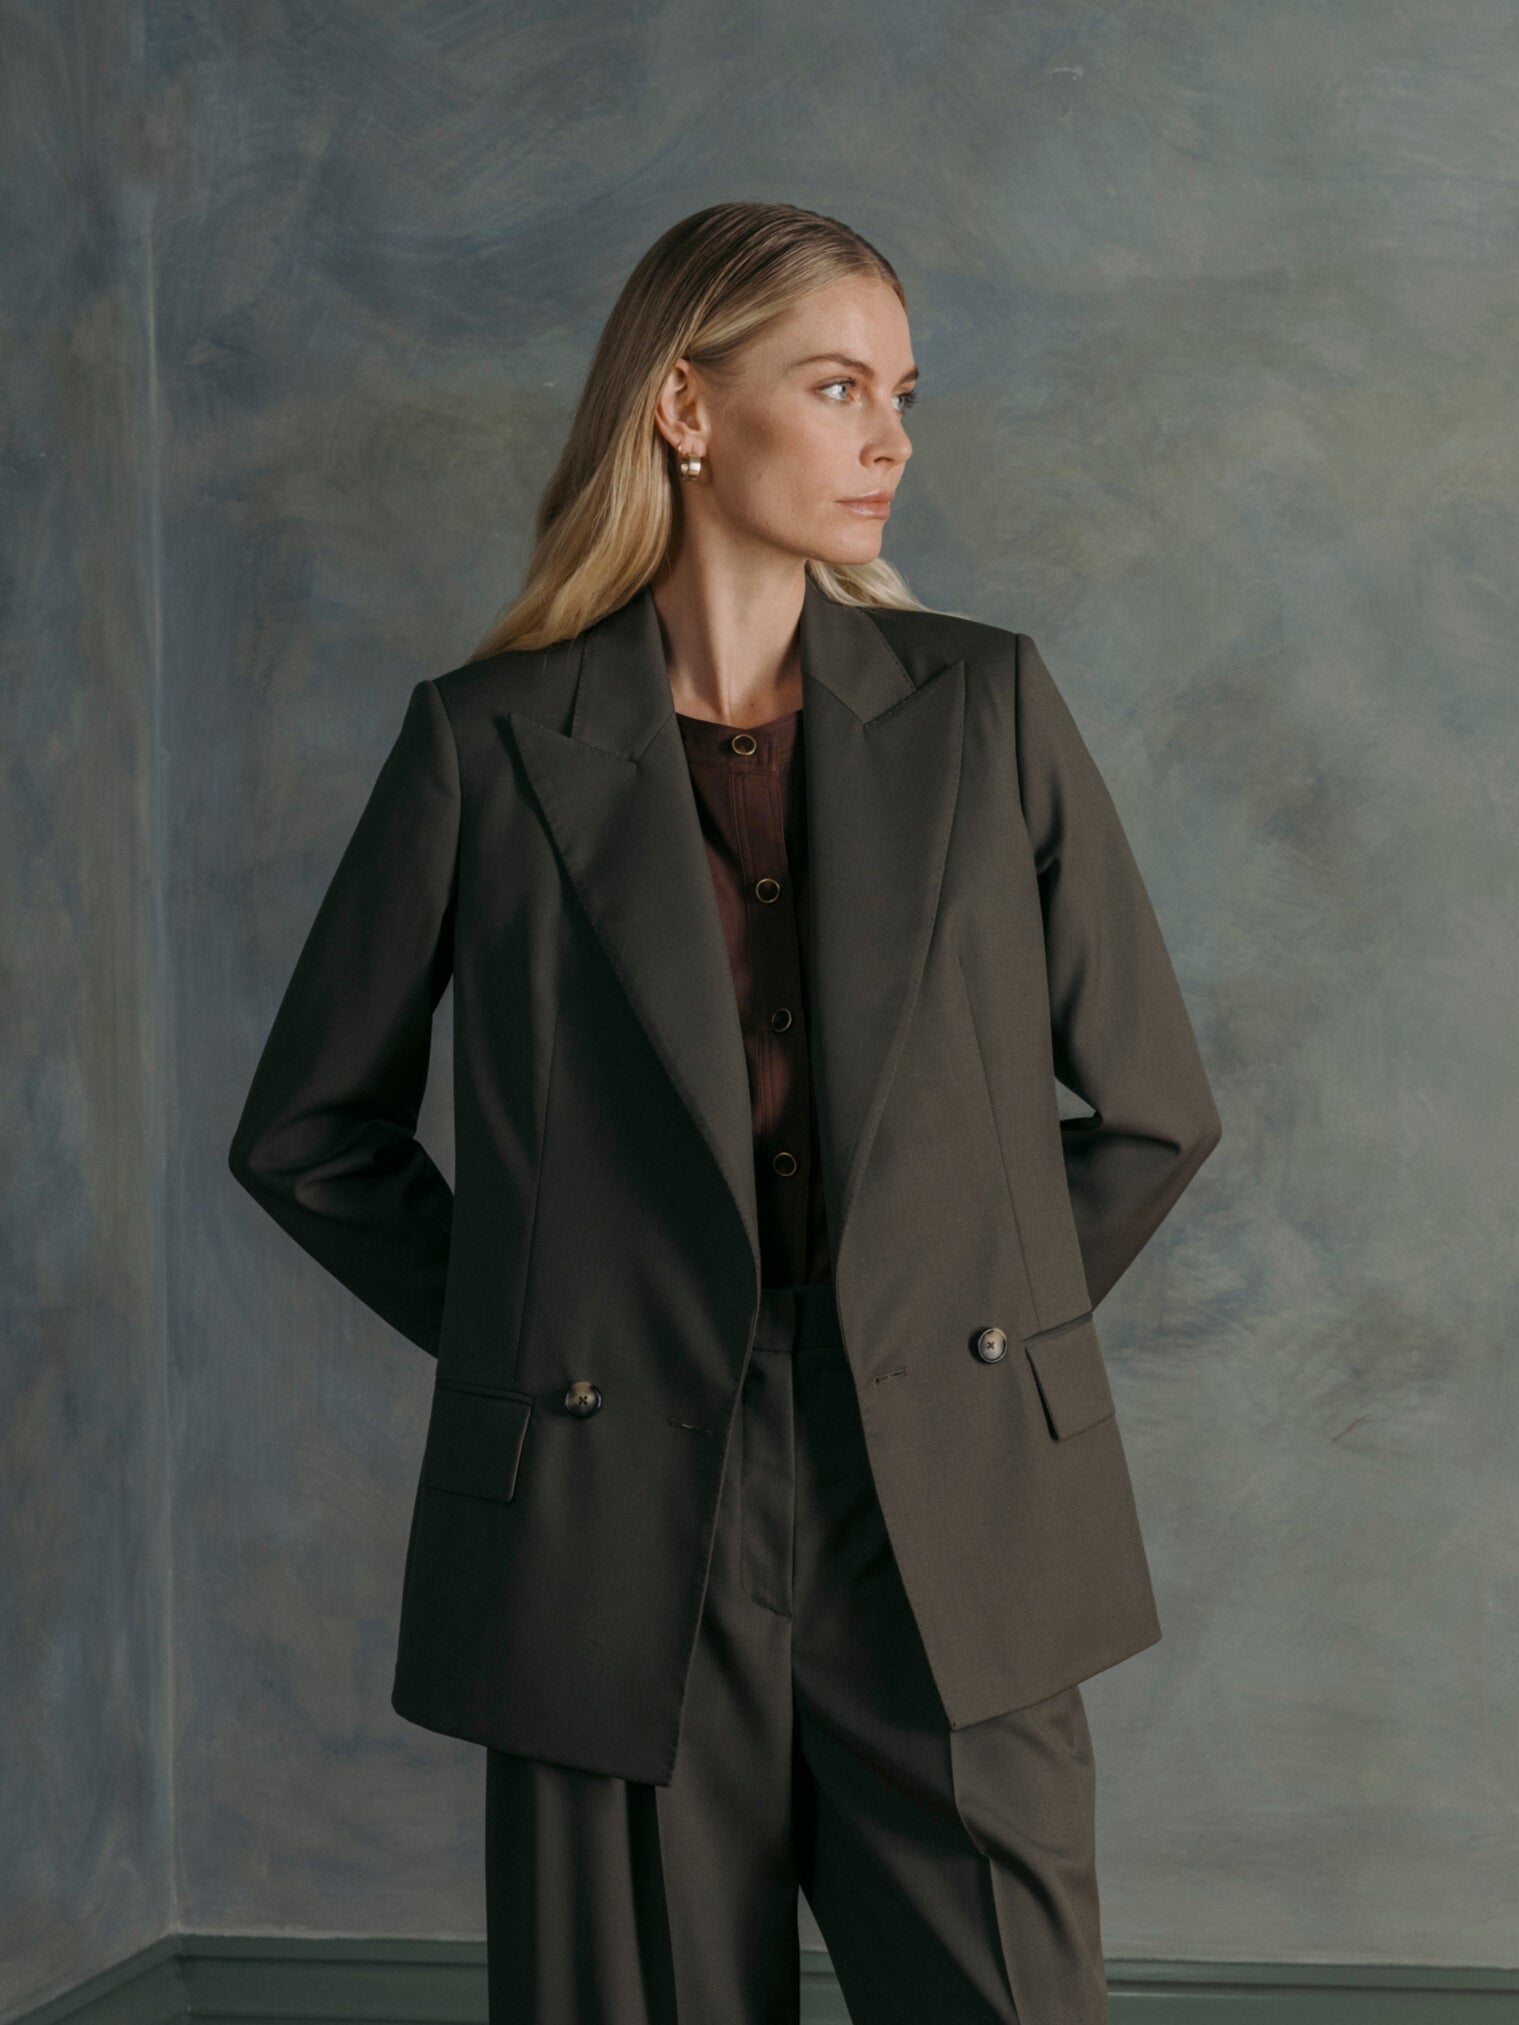 The Signature Dropped Lapel Jacket in Olive